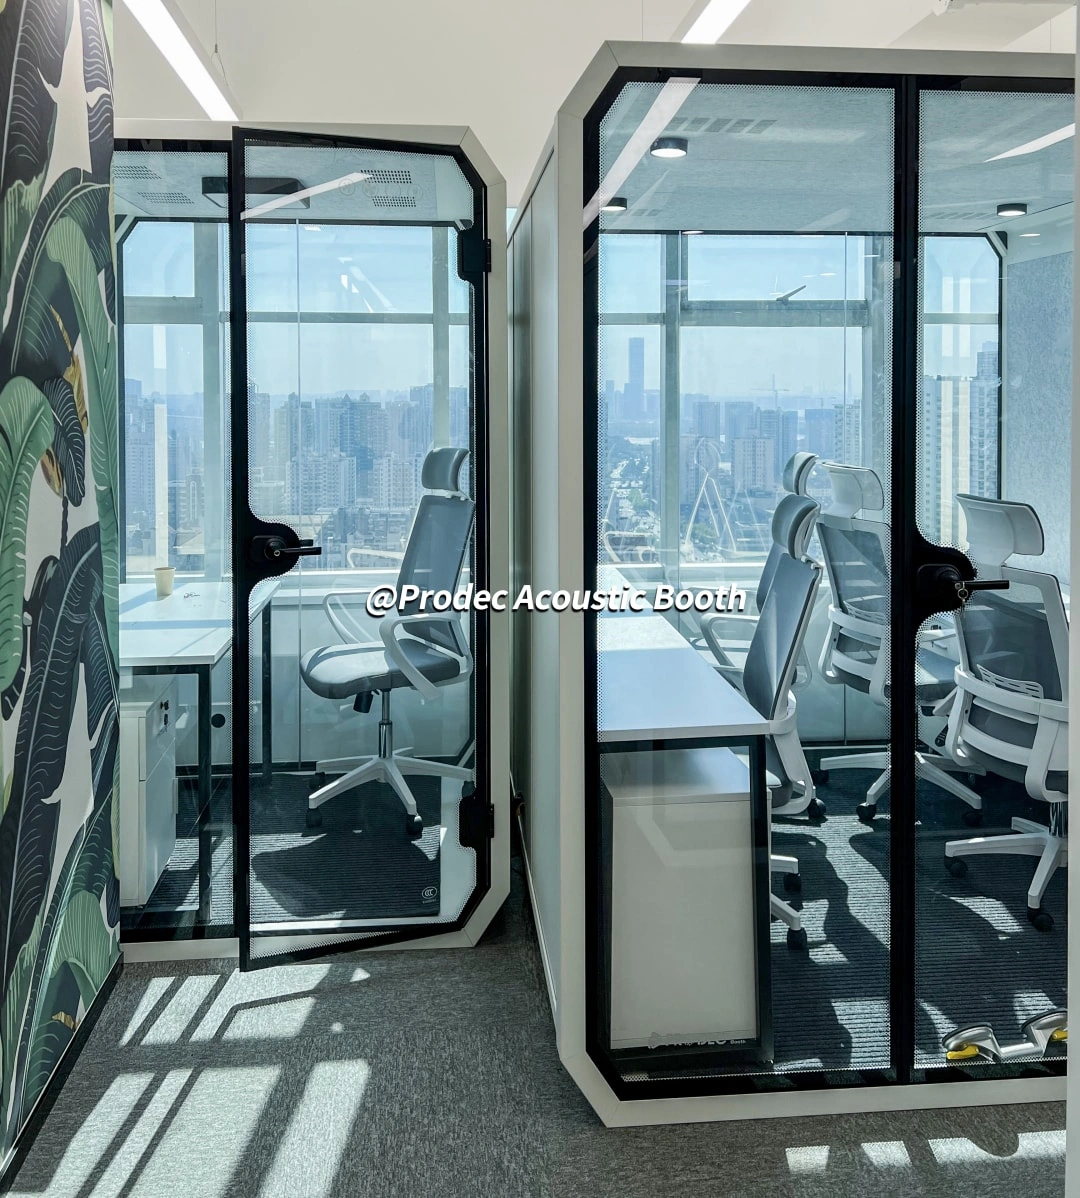 Transform Your Office with Soundproof Office Booths and Pods